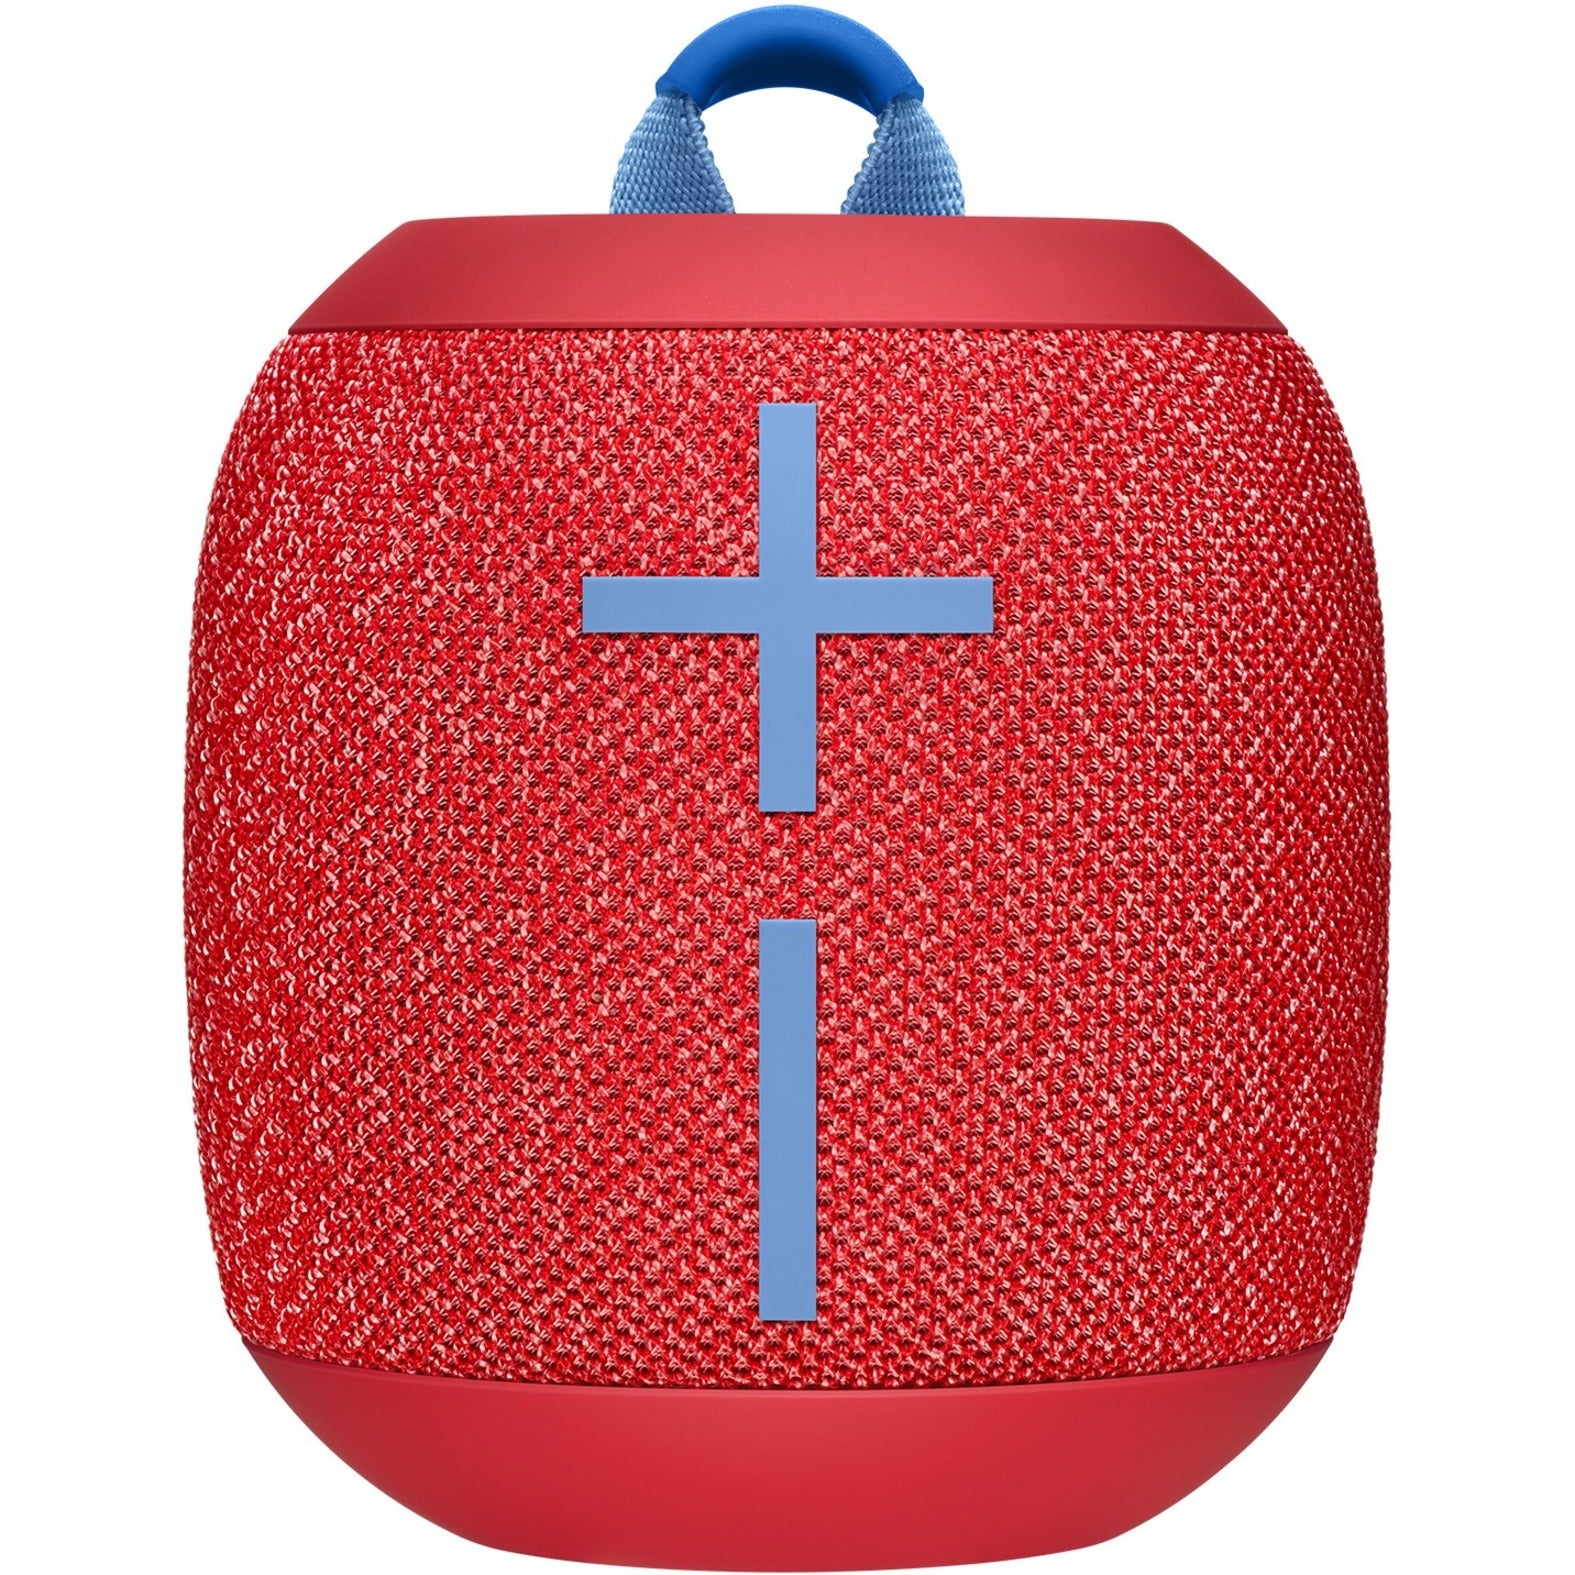 Ultimate Ears 984-001549 WONDERBOOM 2 Speaker System, Radical Red. Portable Wireless Speaker with 360° Circle Sound, Outdoor Boost, and 2-Year Warranty